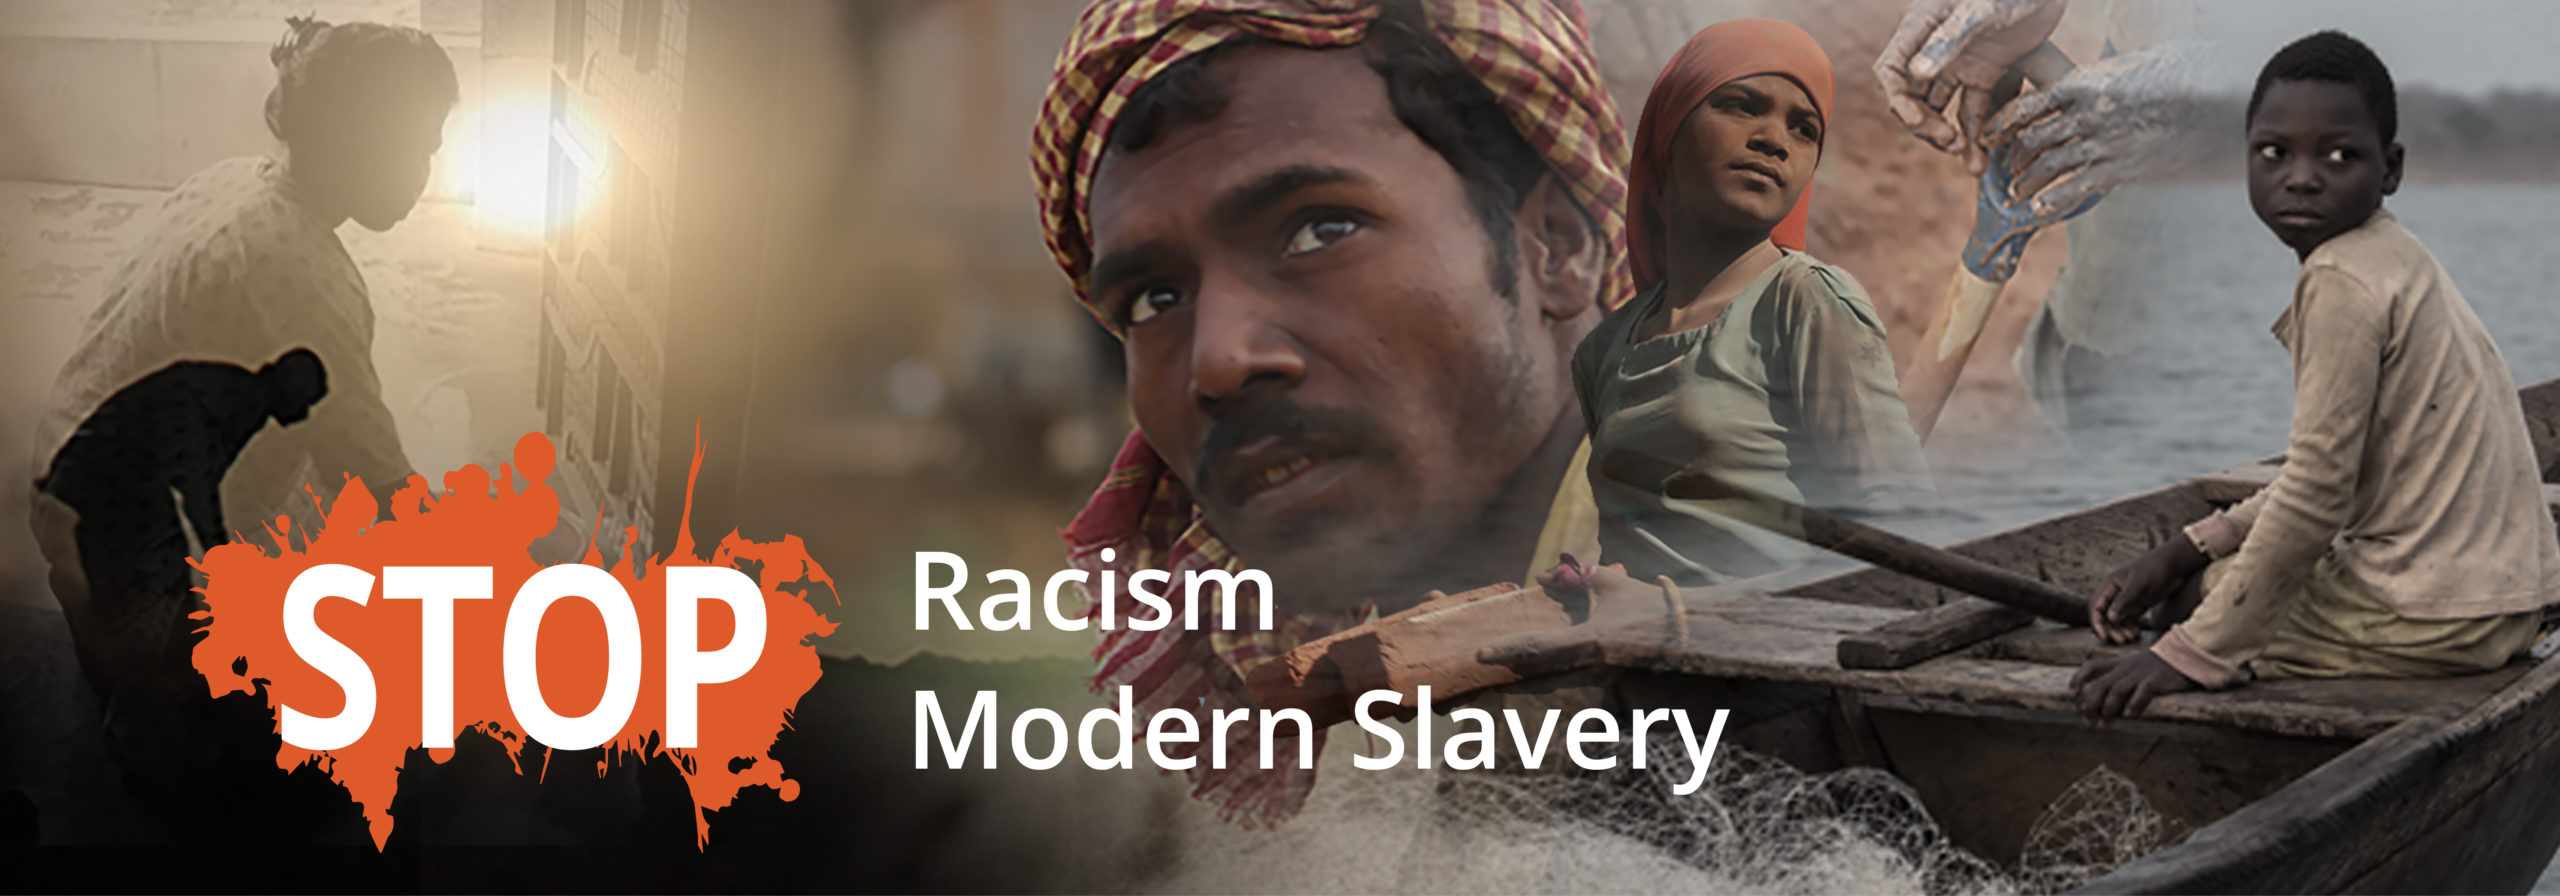 Promoting Racial Justice Can Stop Modern Slavery